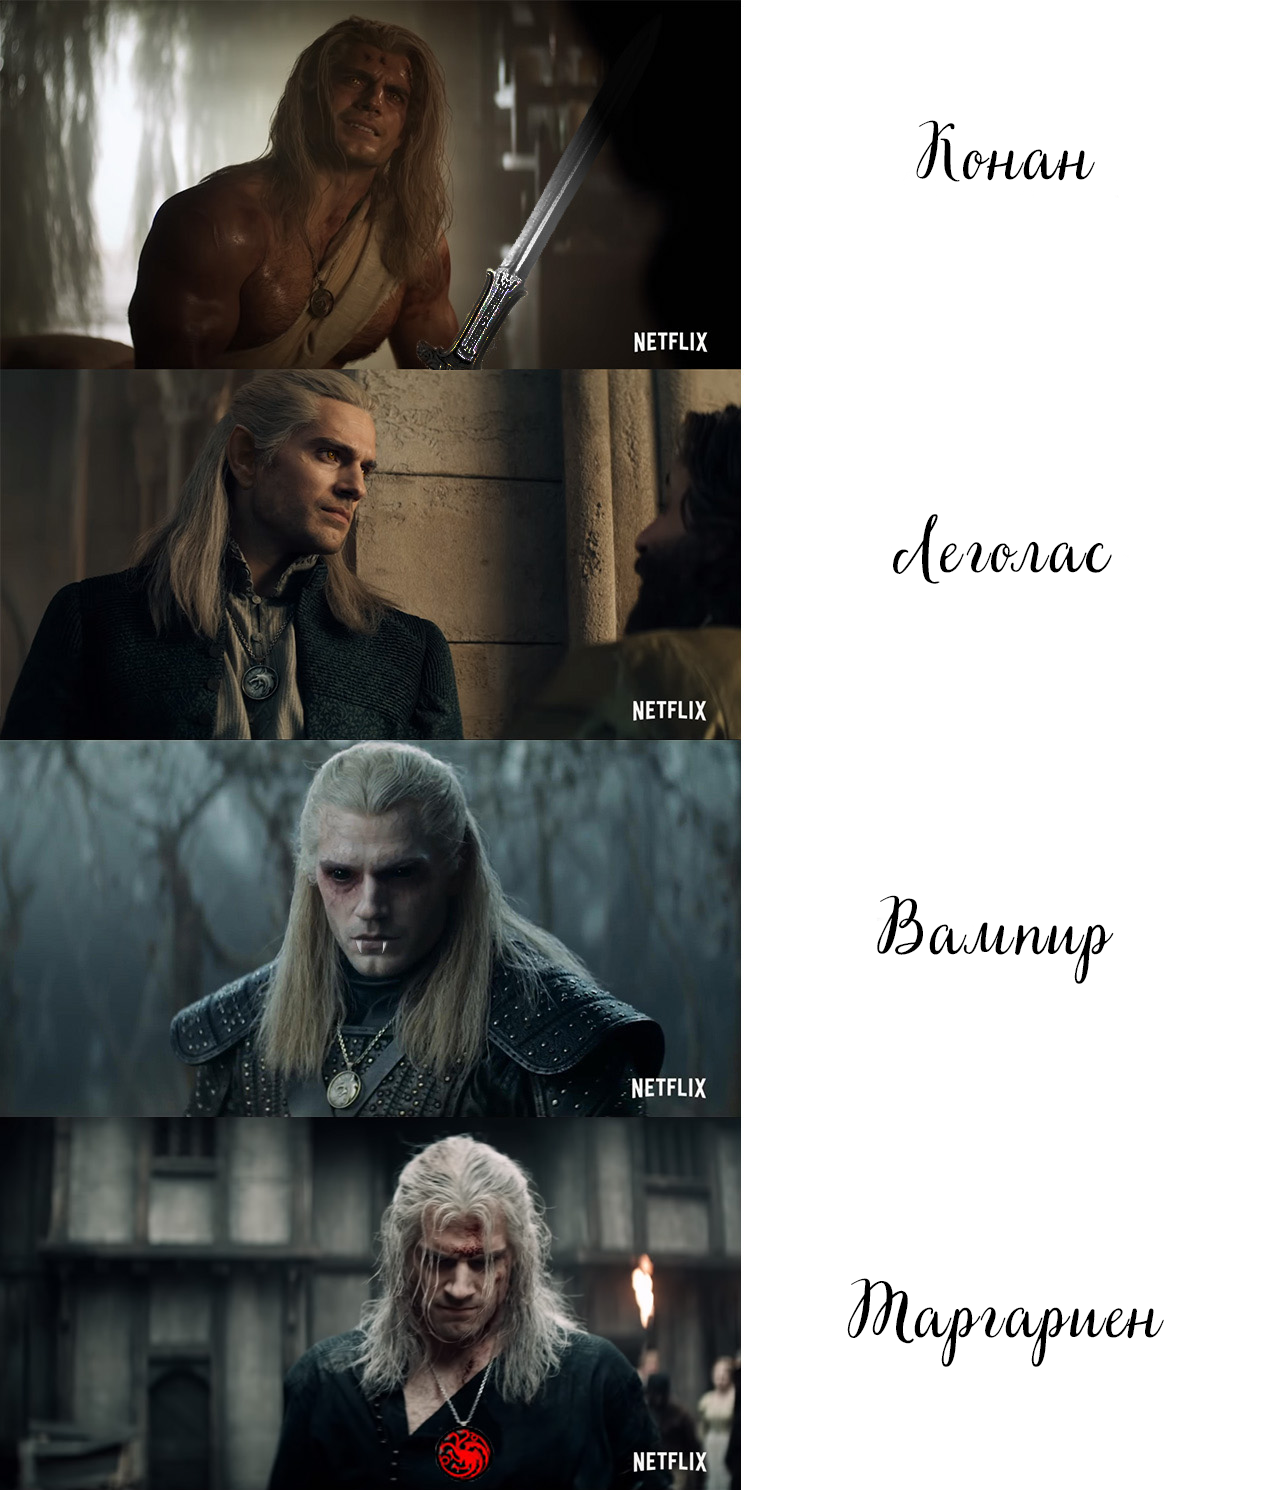 One witcher, but so many images - Witcher, Netflix, Serials, The Witcher series, Humor, Conan, Legolas, Targaryen